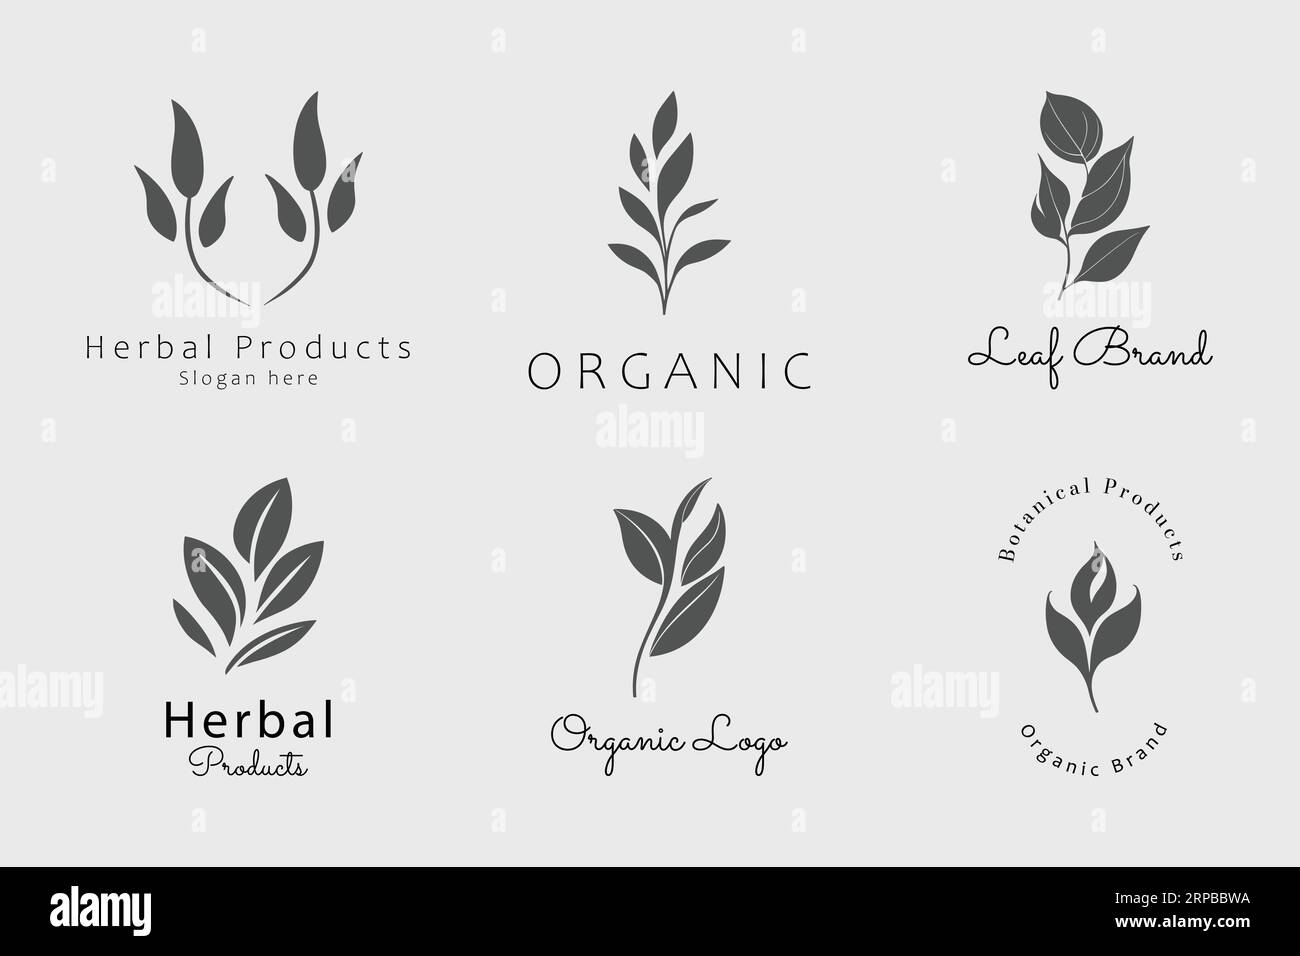 Herbal Products Organic Logo Design collection Stock Vector